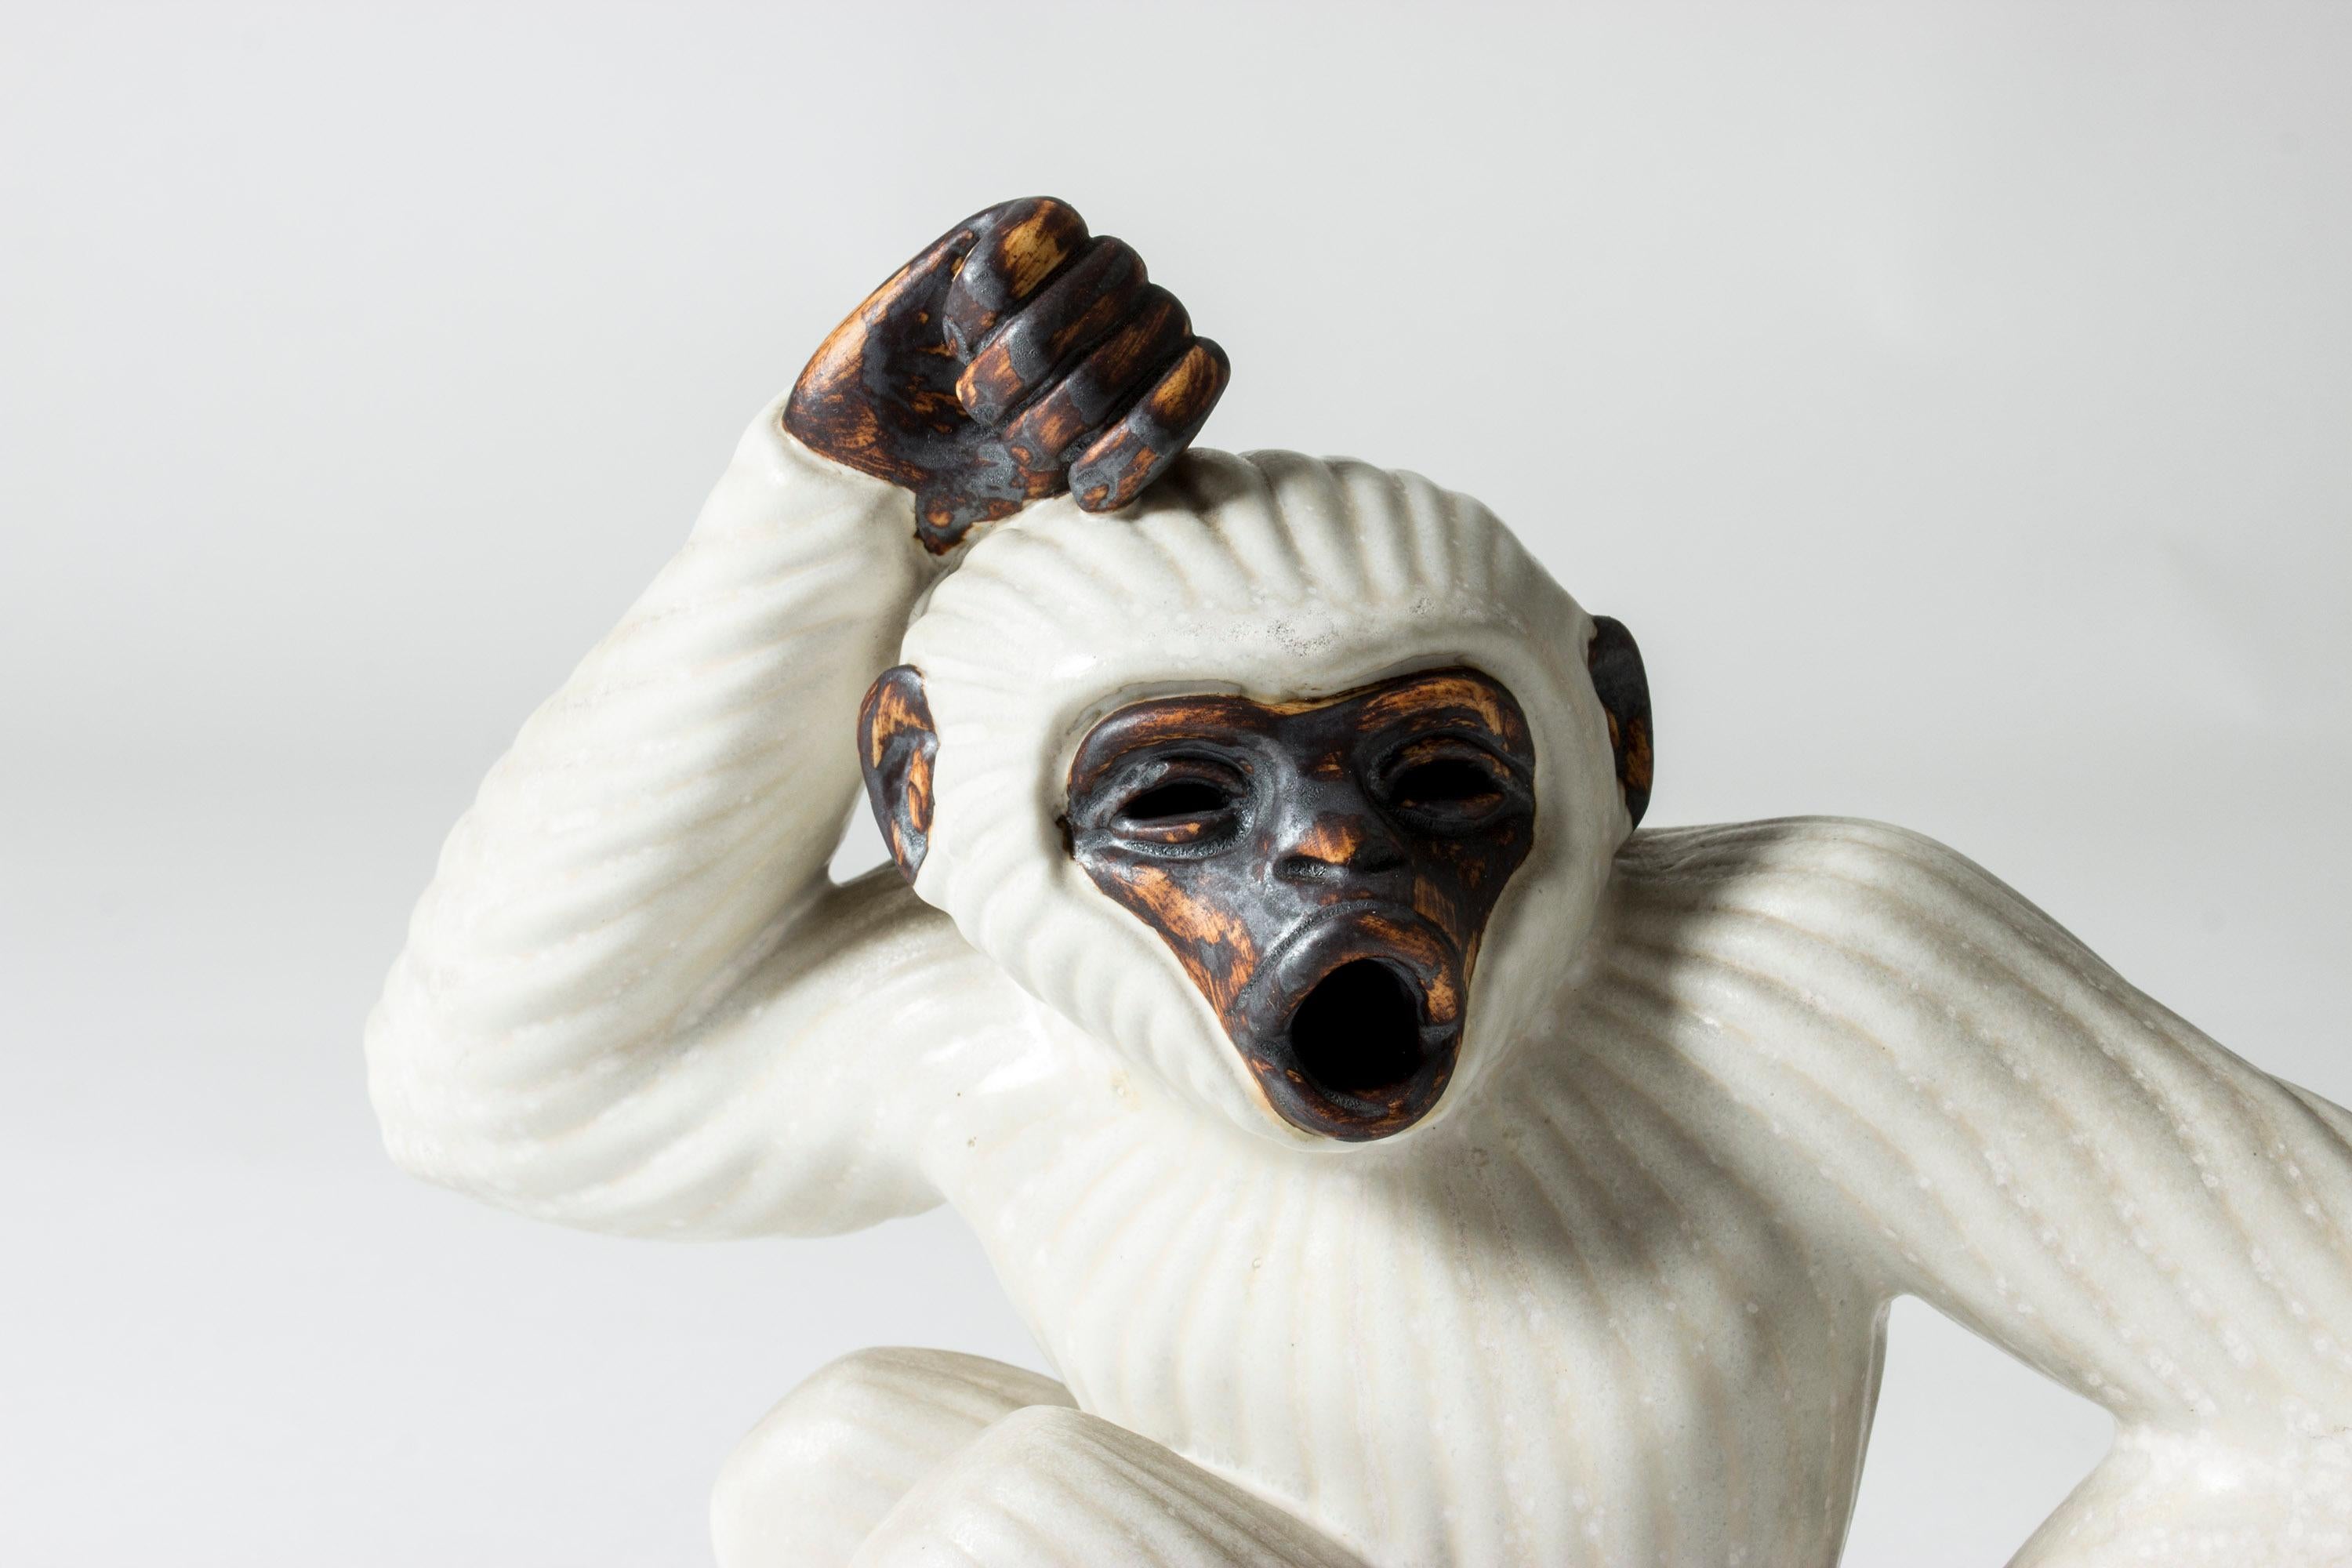 Adorable stoneware monkey figurine by Gunnar Nylund, glazed white and dark brown. Beautifully sculpted, with a spirited expression. Gunnar Nylund’s animal figurines are among his most loved creations, combining naturalistic and modernist elements